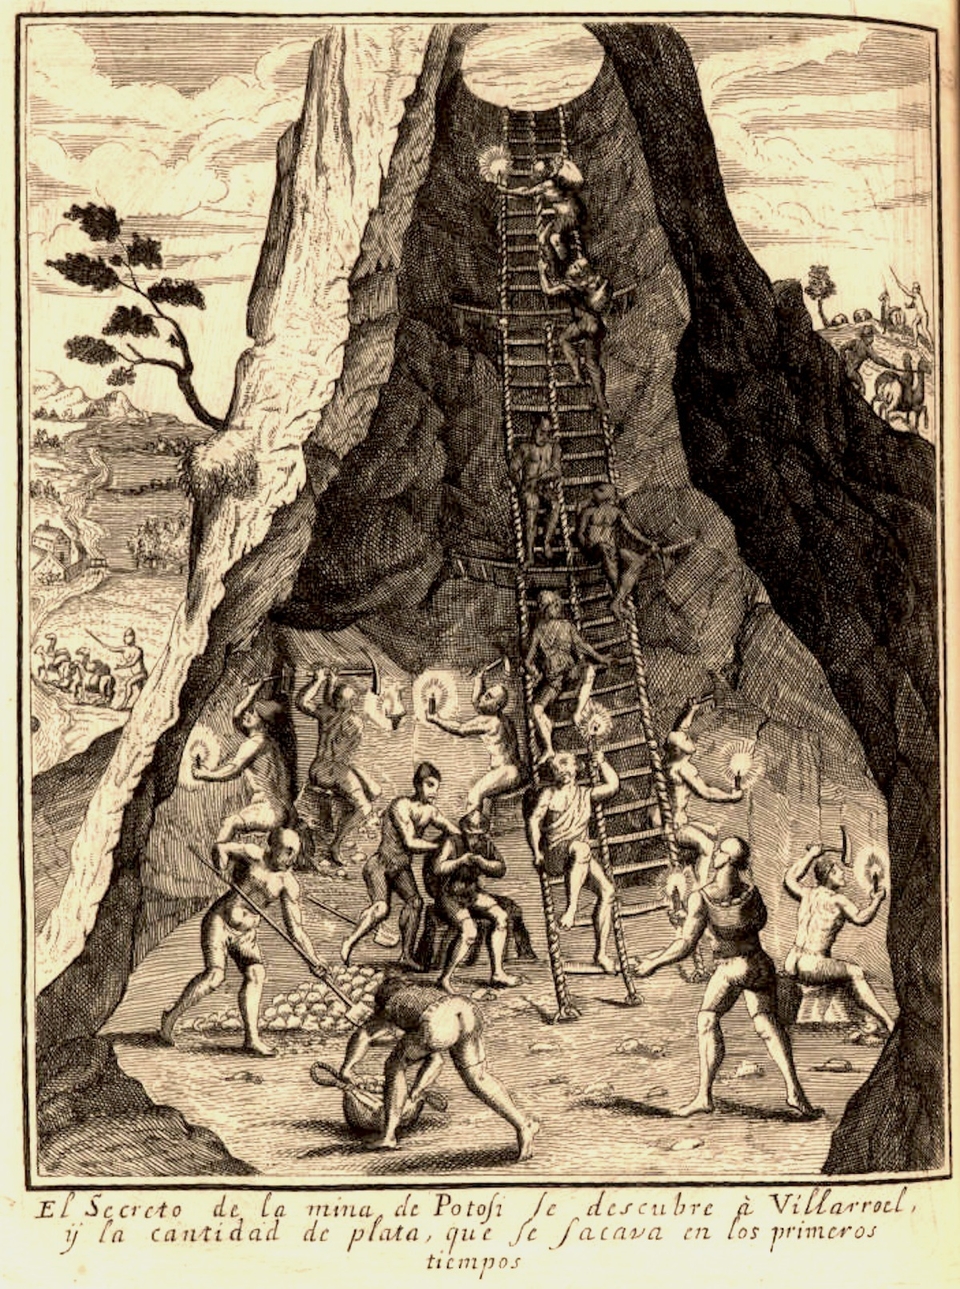 The Miners During Colonial Latin America